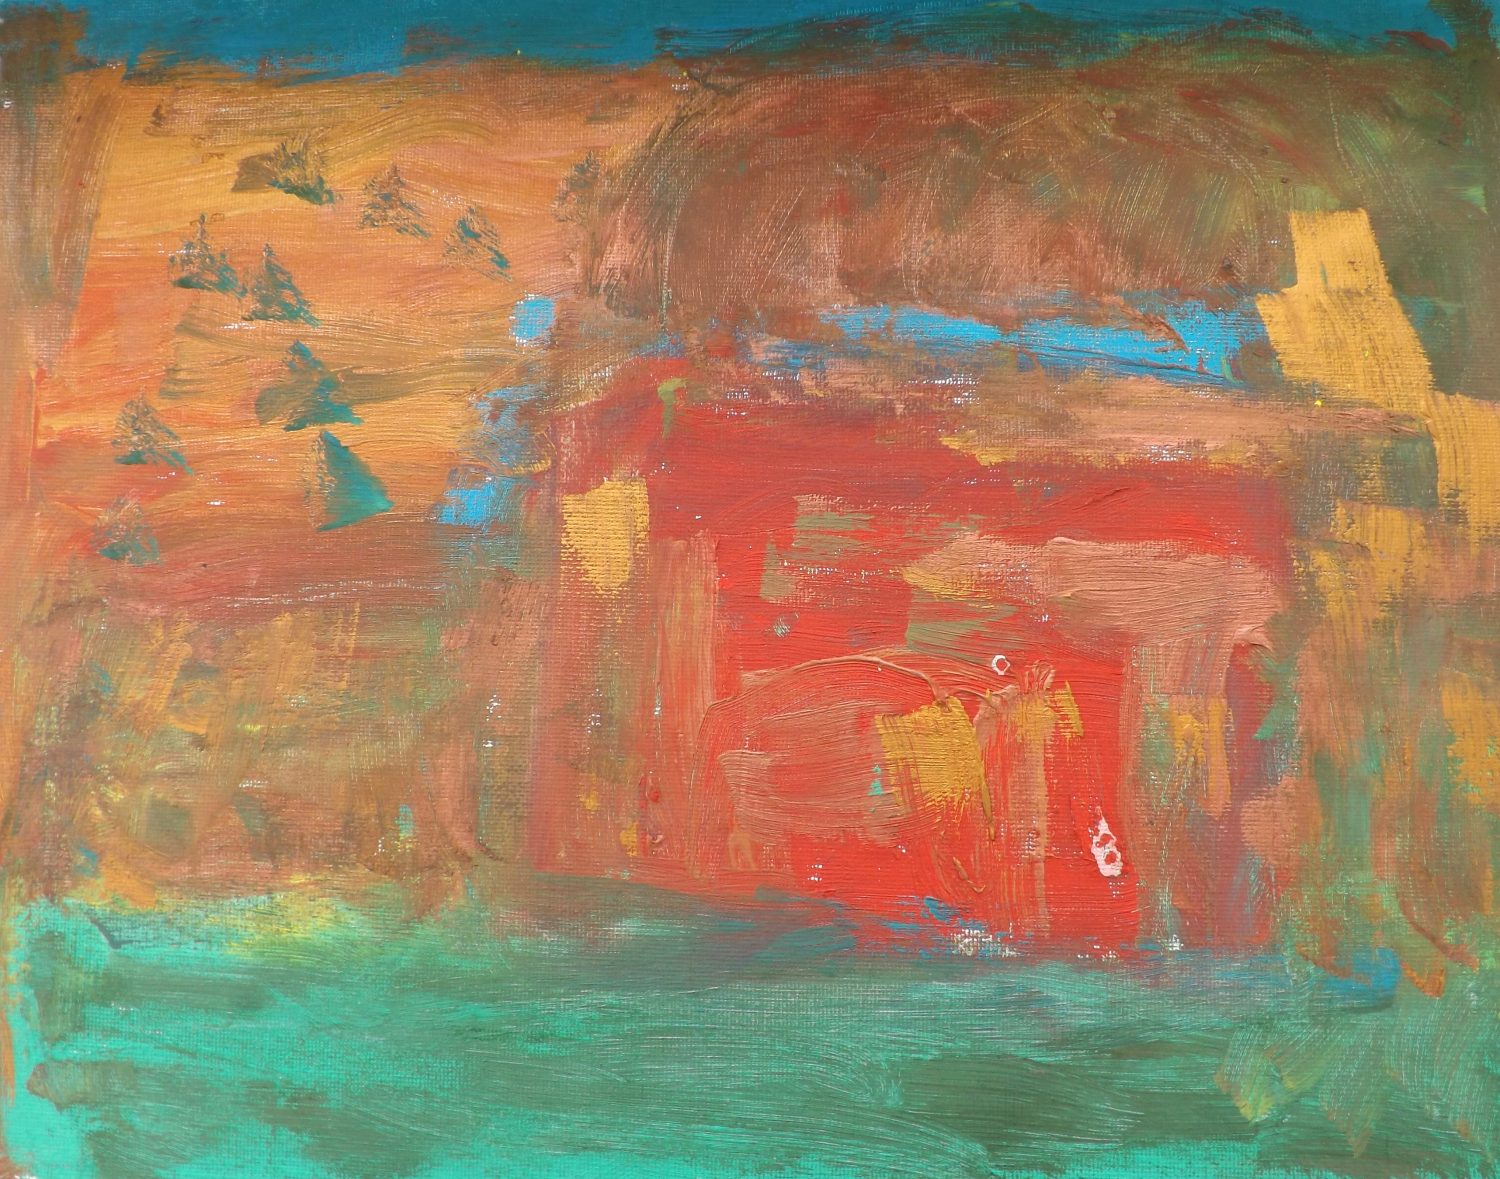 thumbnail of Iris Hill Day Hab by Louise S. Medium: Acrylic on canvas. Date 2014